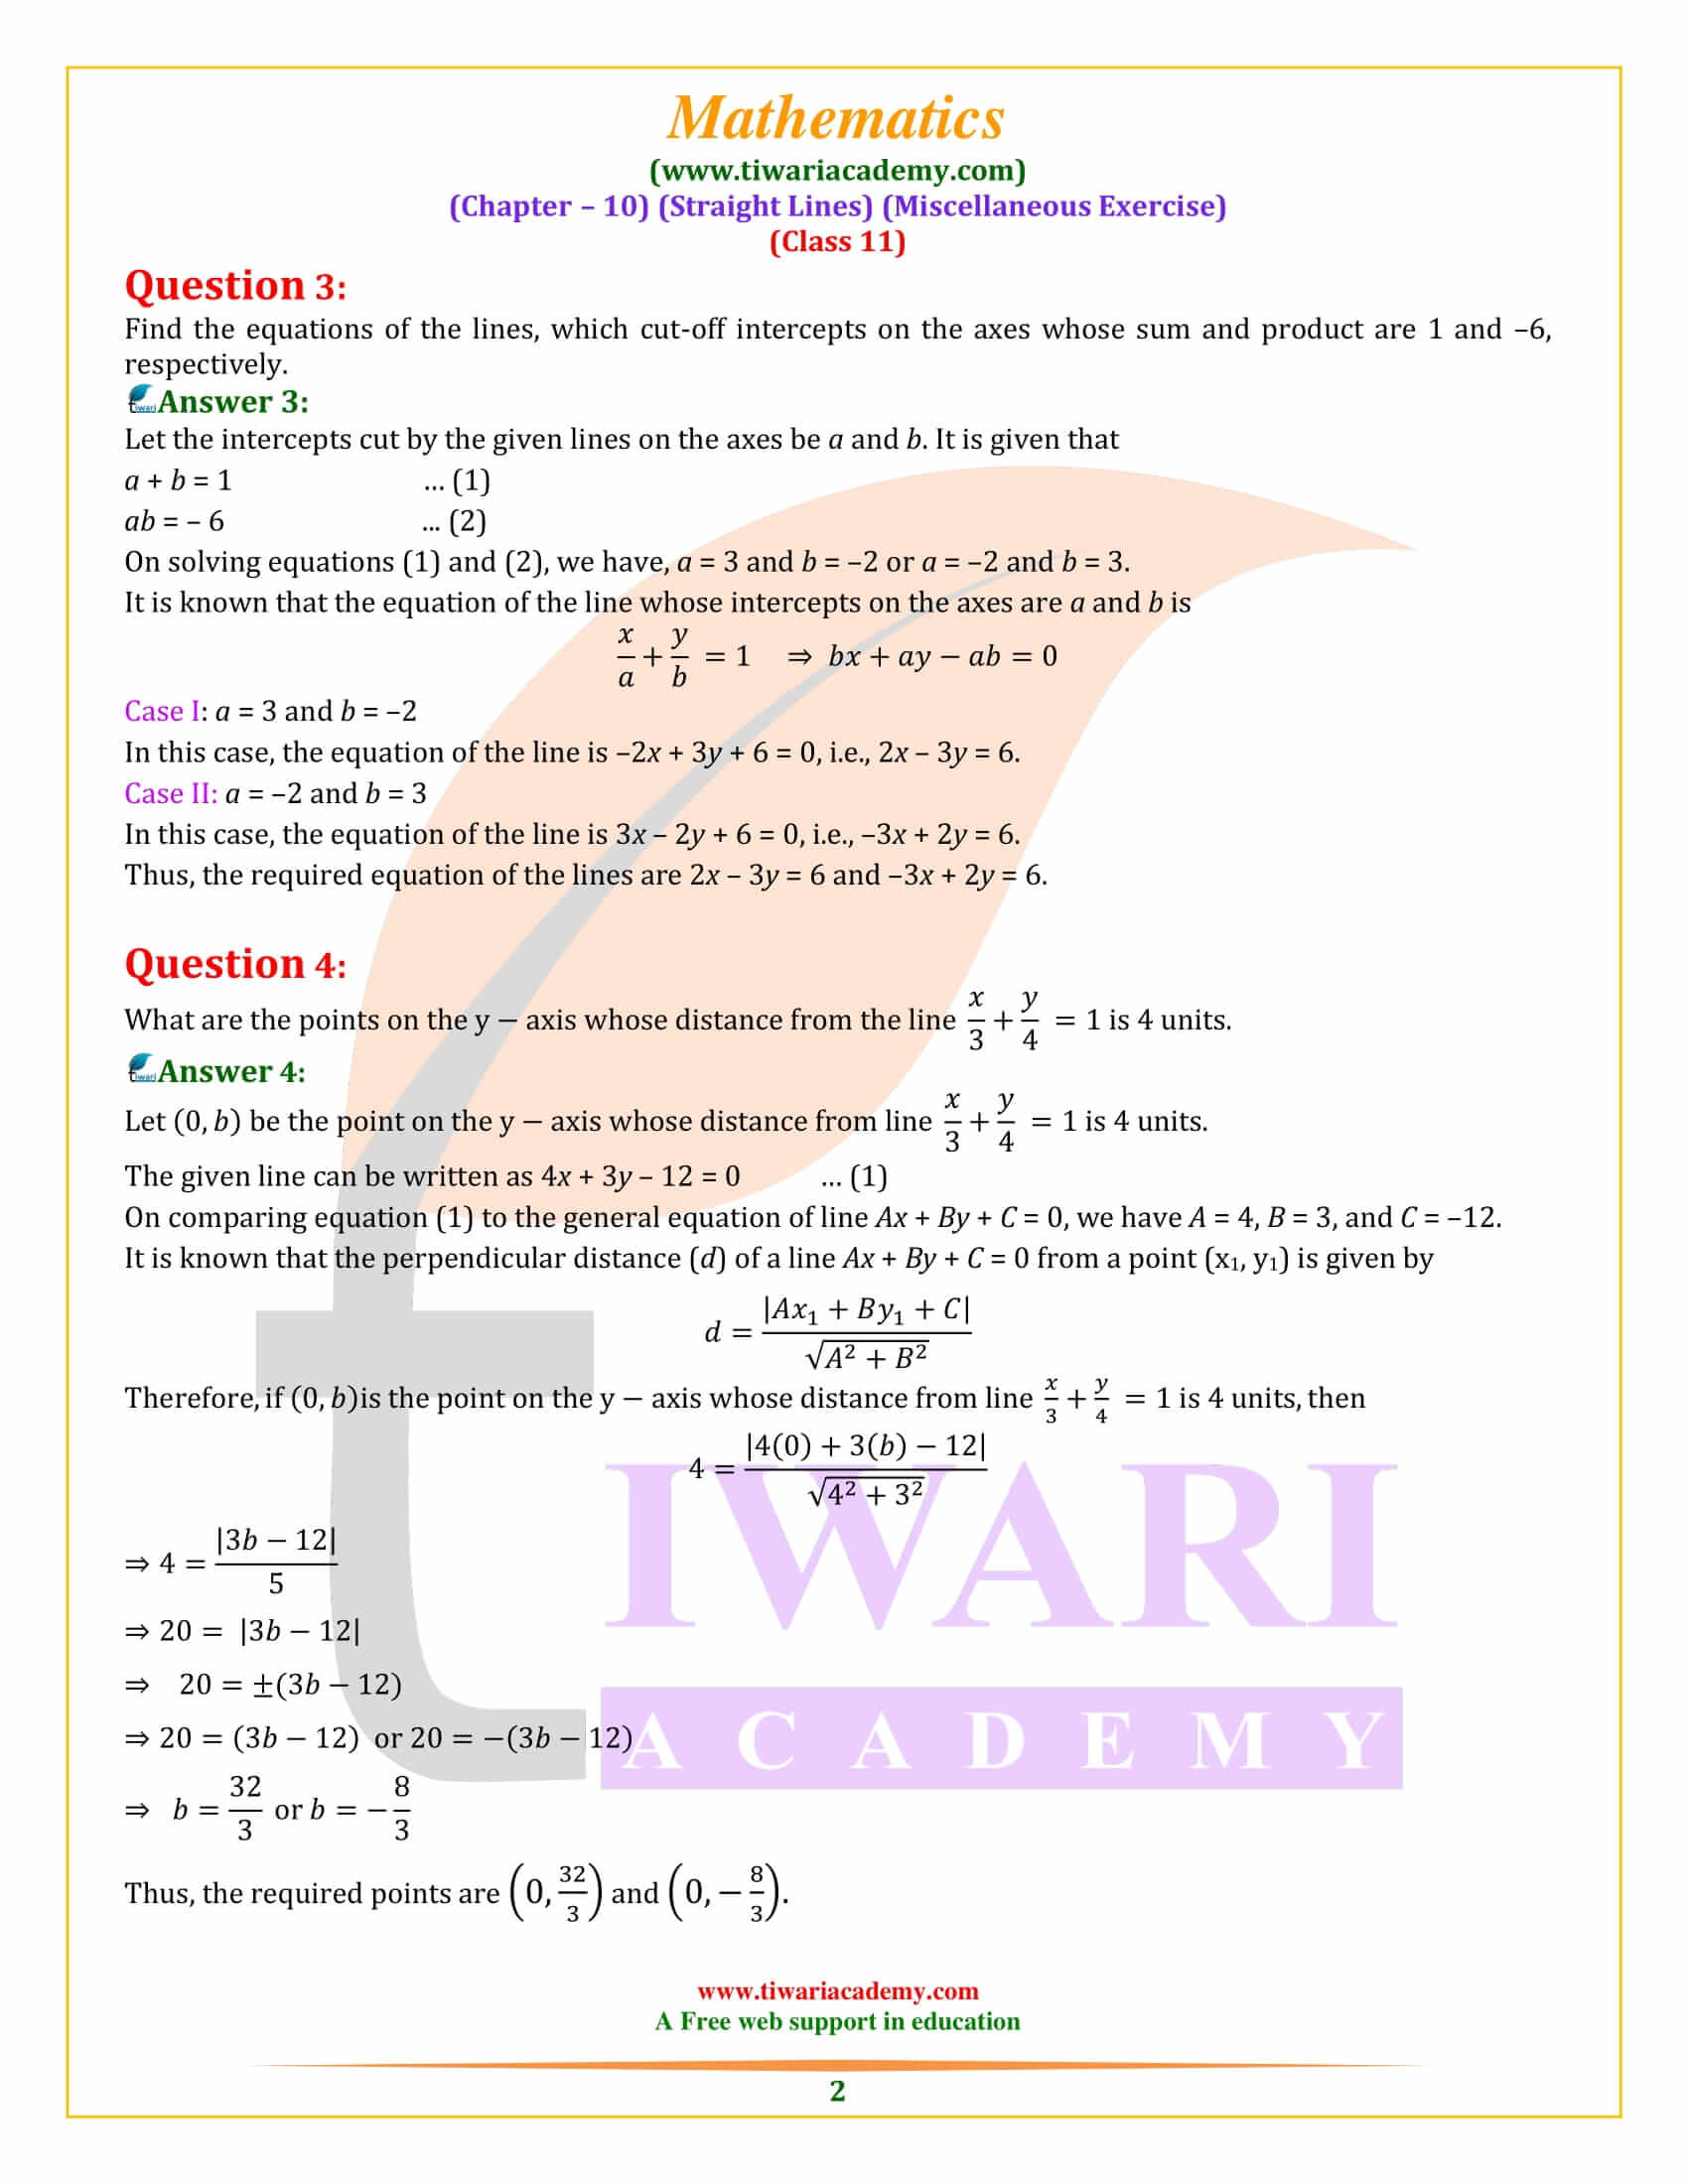 NCERT Solutions for Class 11 Maths Chapter 10 Miscellaneous Exercise